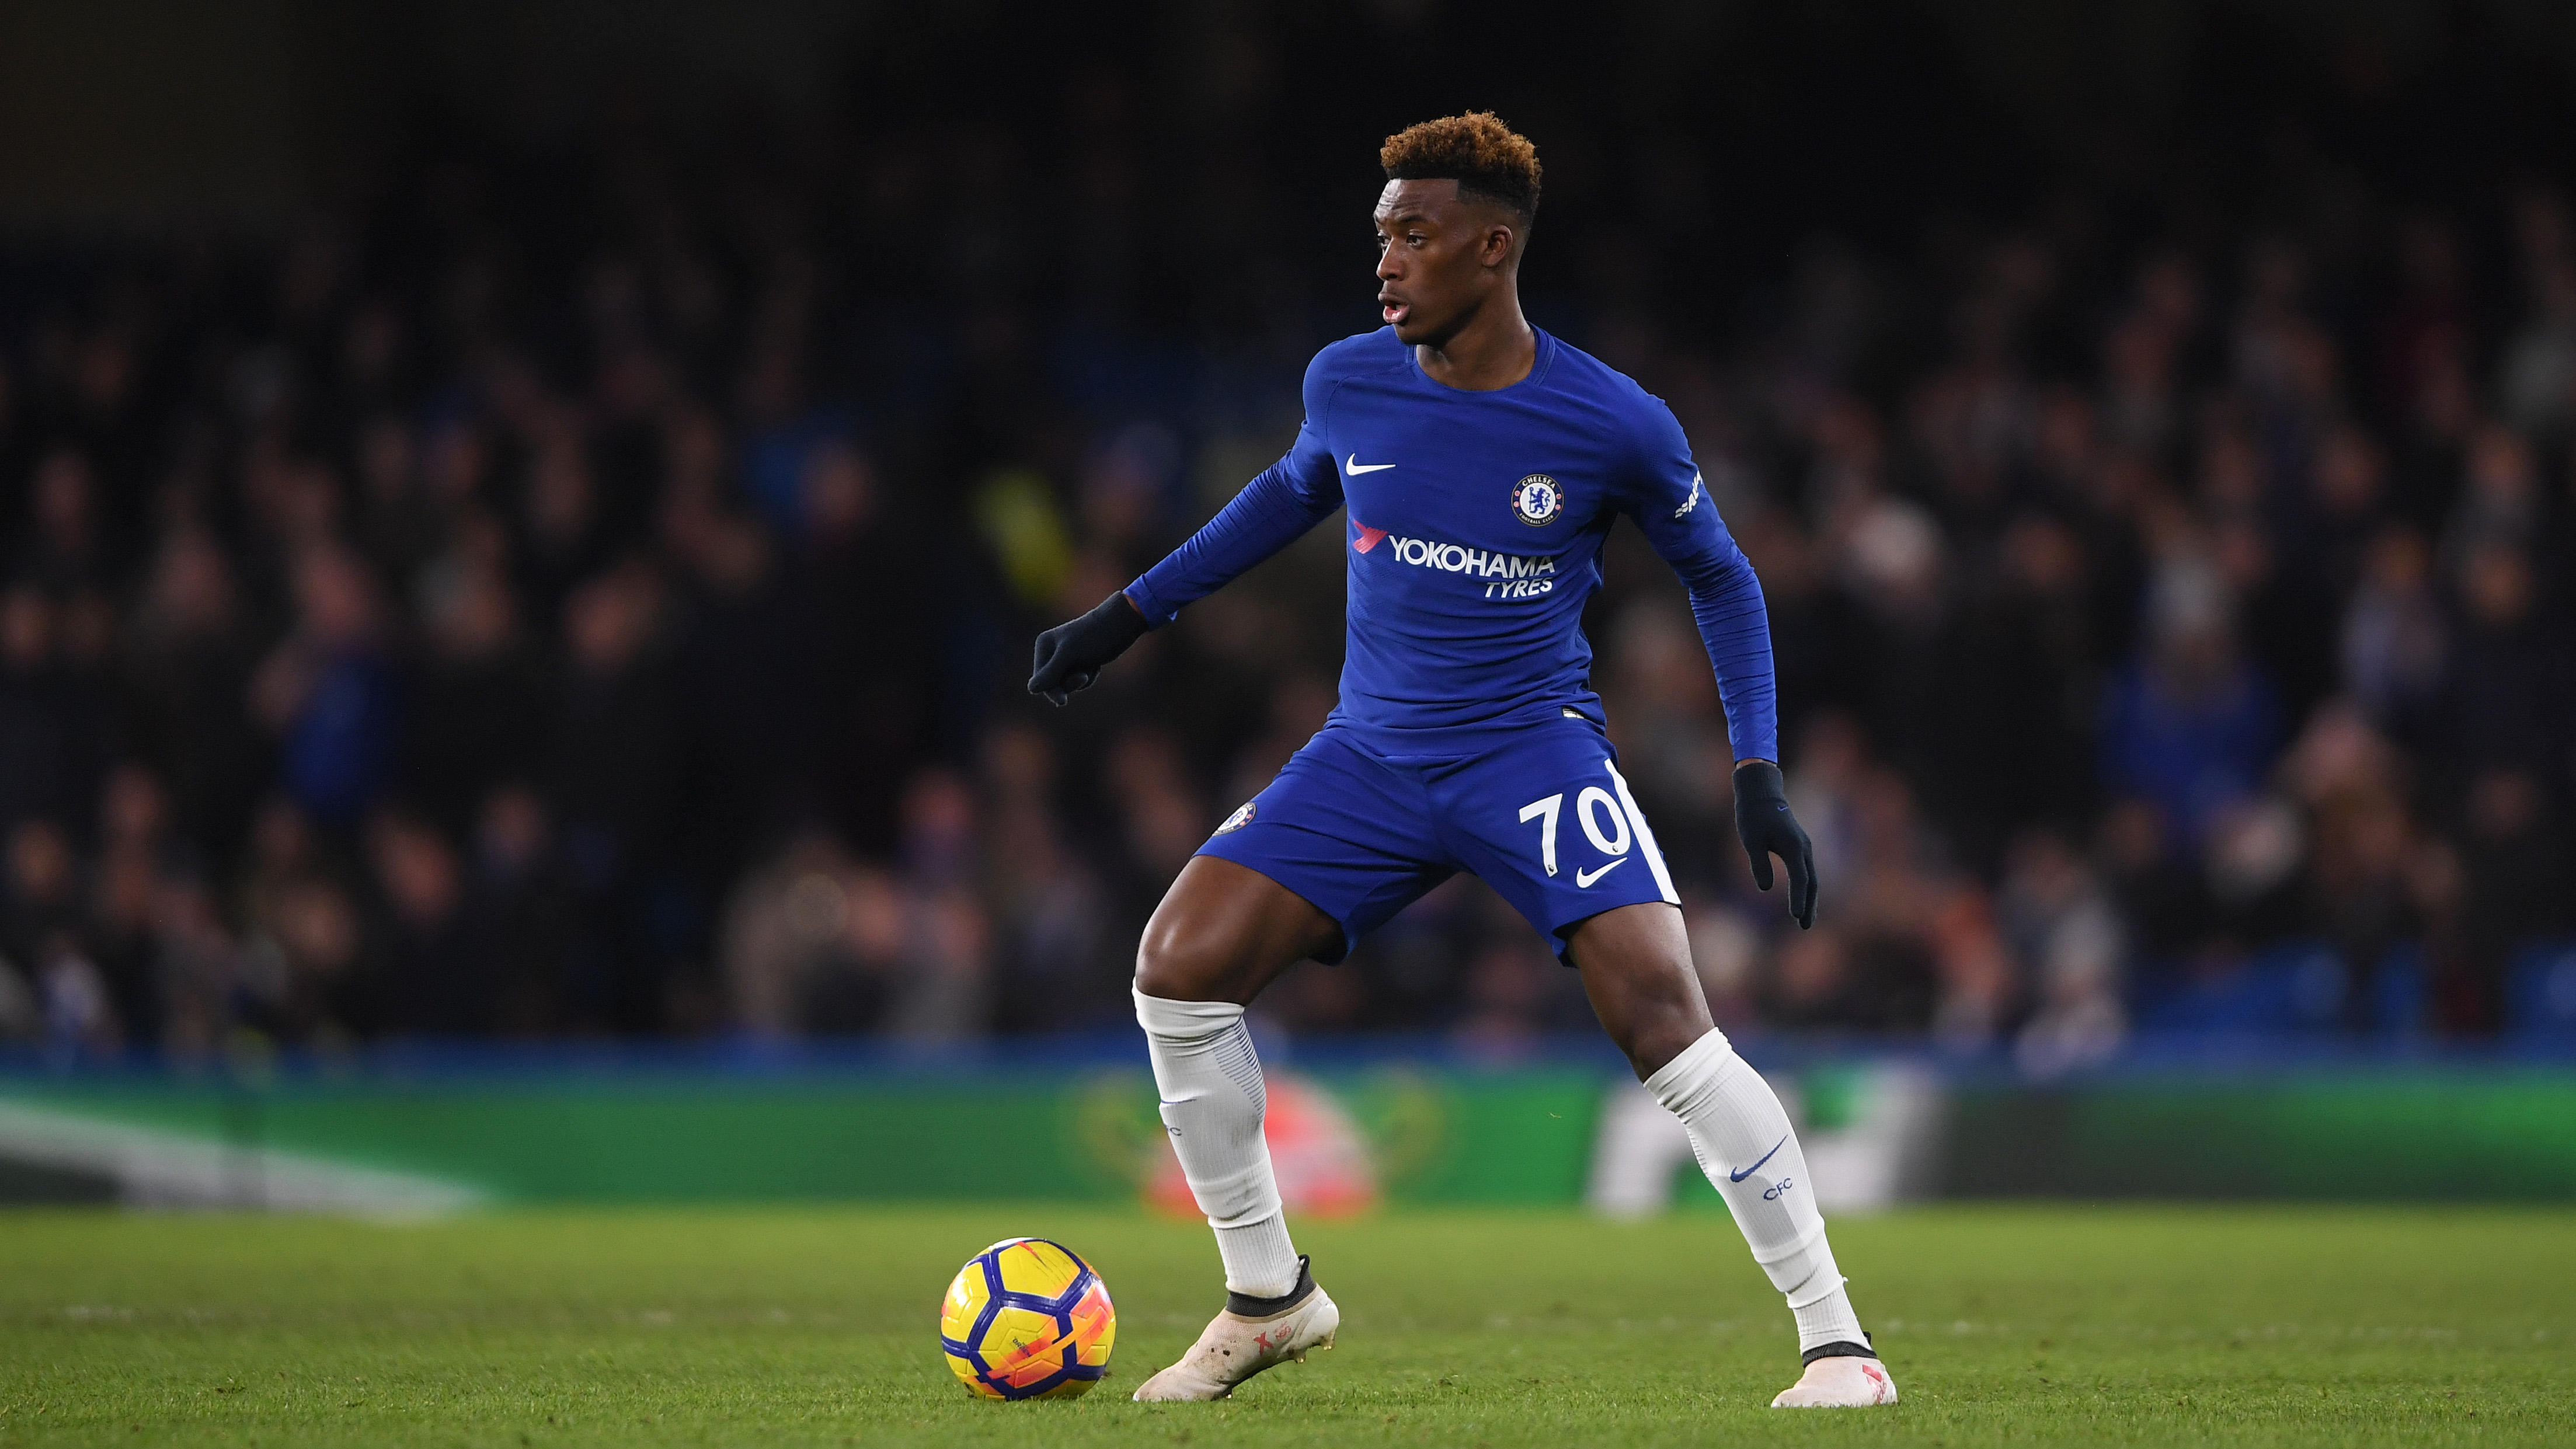 LONDON, ENGLAND - JANUARY 31:  Callum Hudson-Odoi of Chelsea in action during the Premier League match between Chelsea and AFC Bournemouth at Stamford Bridge on January 31, 2018 in London, England.  (Photo by Mike Hewitt/Getty Images)